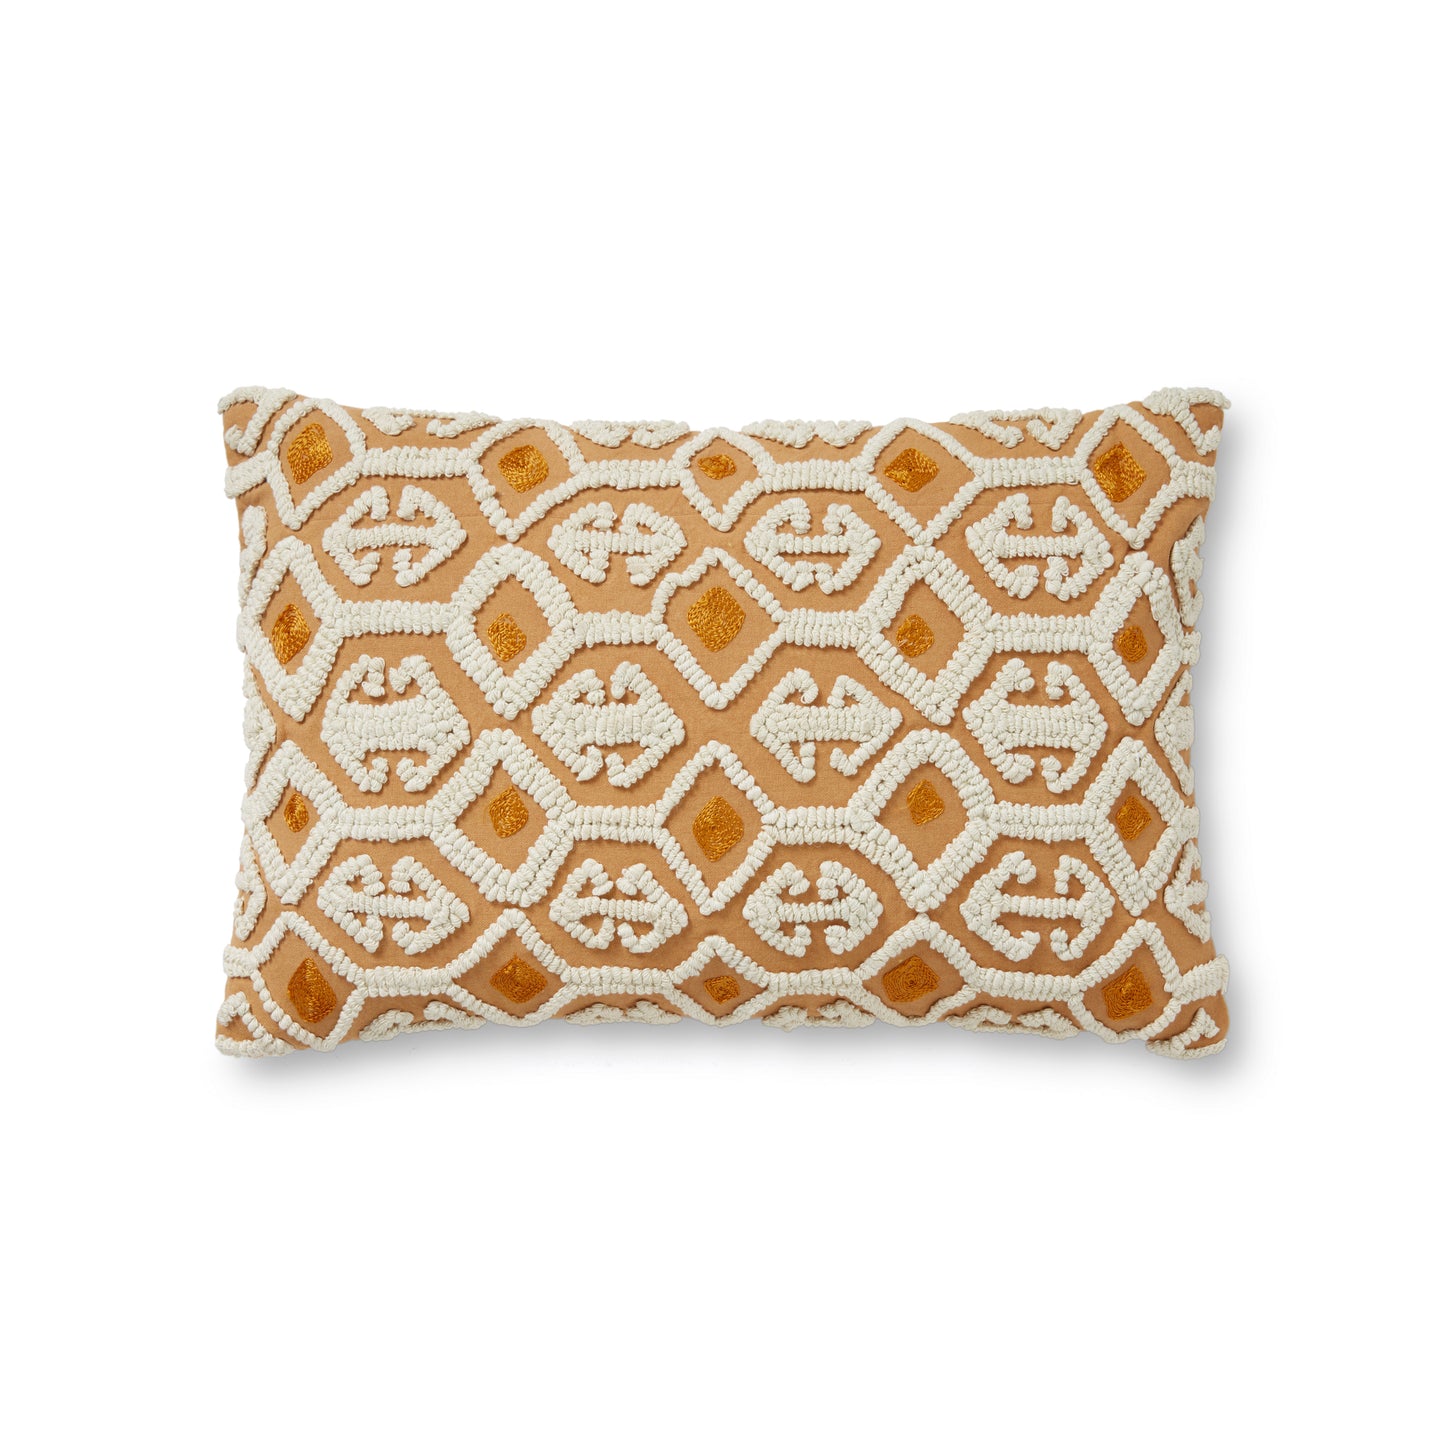 Photo of a pillow;  PLL0050 Ivory / Multi 13" x 21" Cover w/Poly Pillow